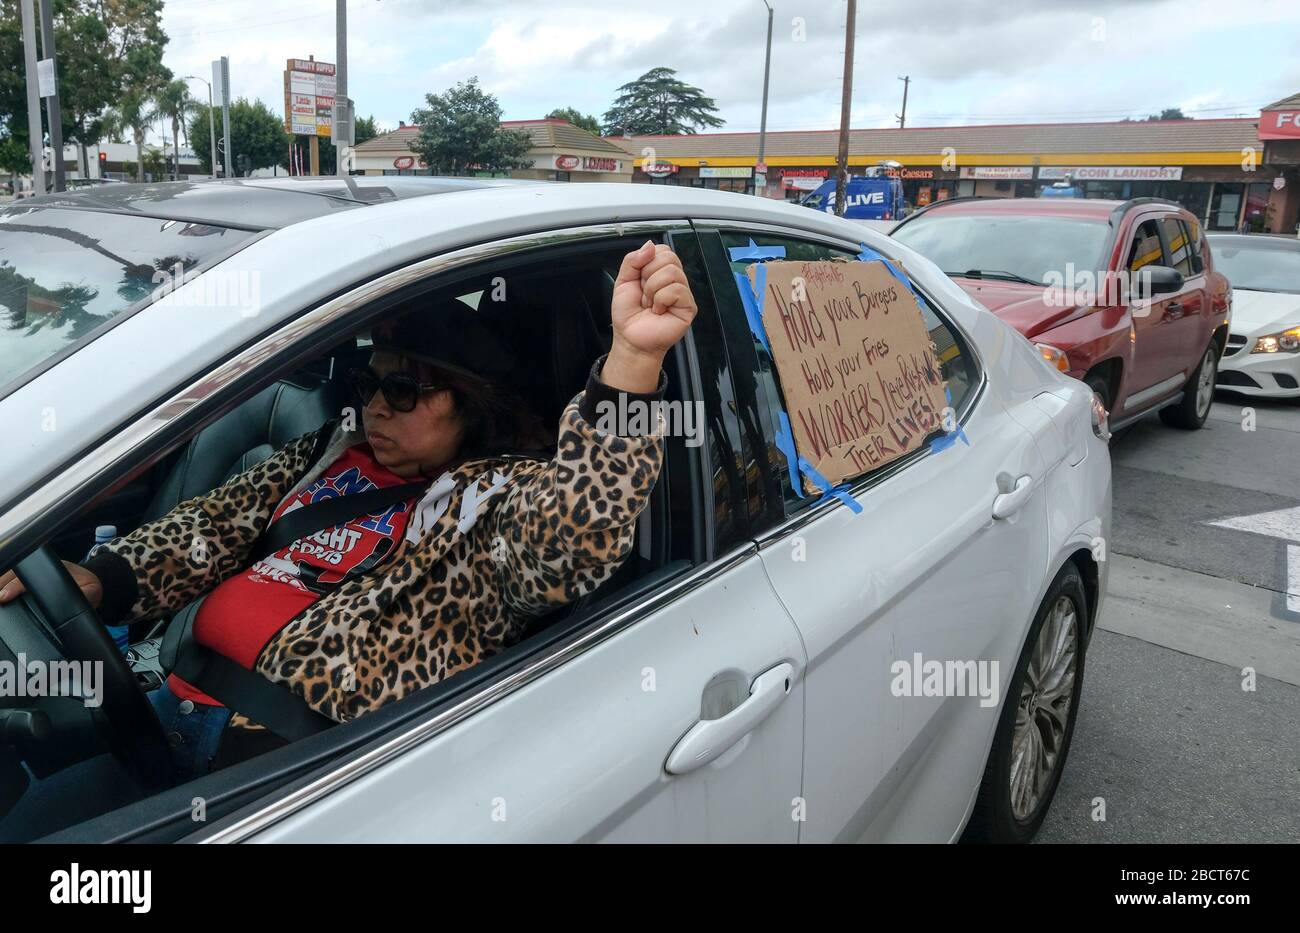 Los Angeles, California, USA. 5th Apr, 2020. A worker takes part in a drive-thru ''strike'' at a McDonald's restaurant on Sunday, April 5, 2020 in Los Angeles. The workers are demanding a two-week quarantine period, with full pay for a co-worker who tested positive for COVID-19. Credit: Ringo Chiu/ZUMA Wire/Alamy Live News Stock Photo